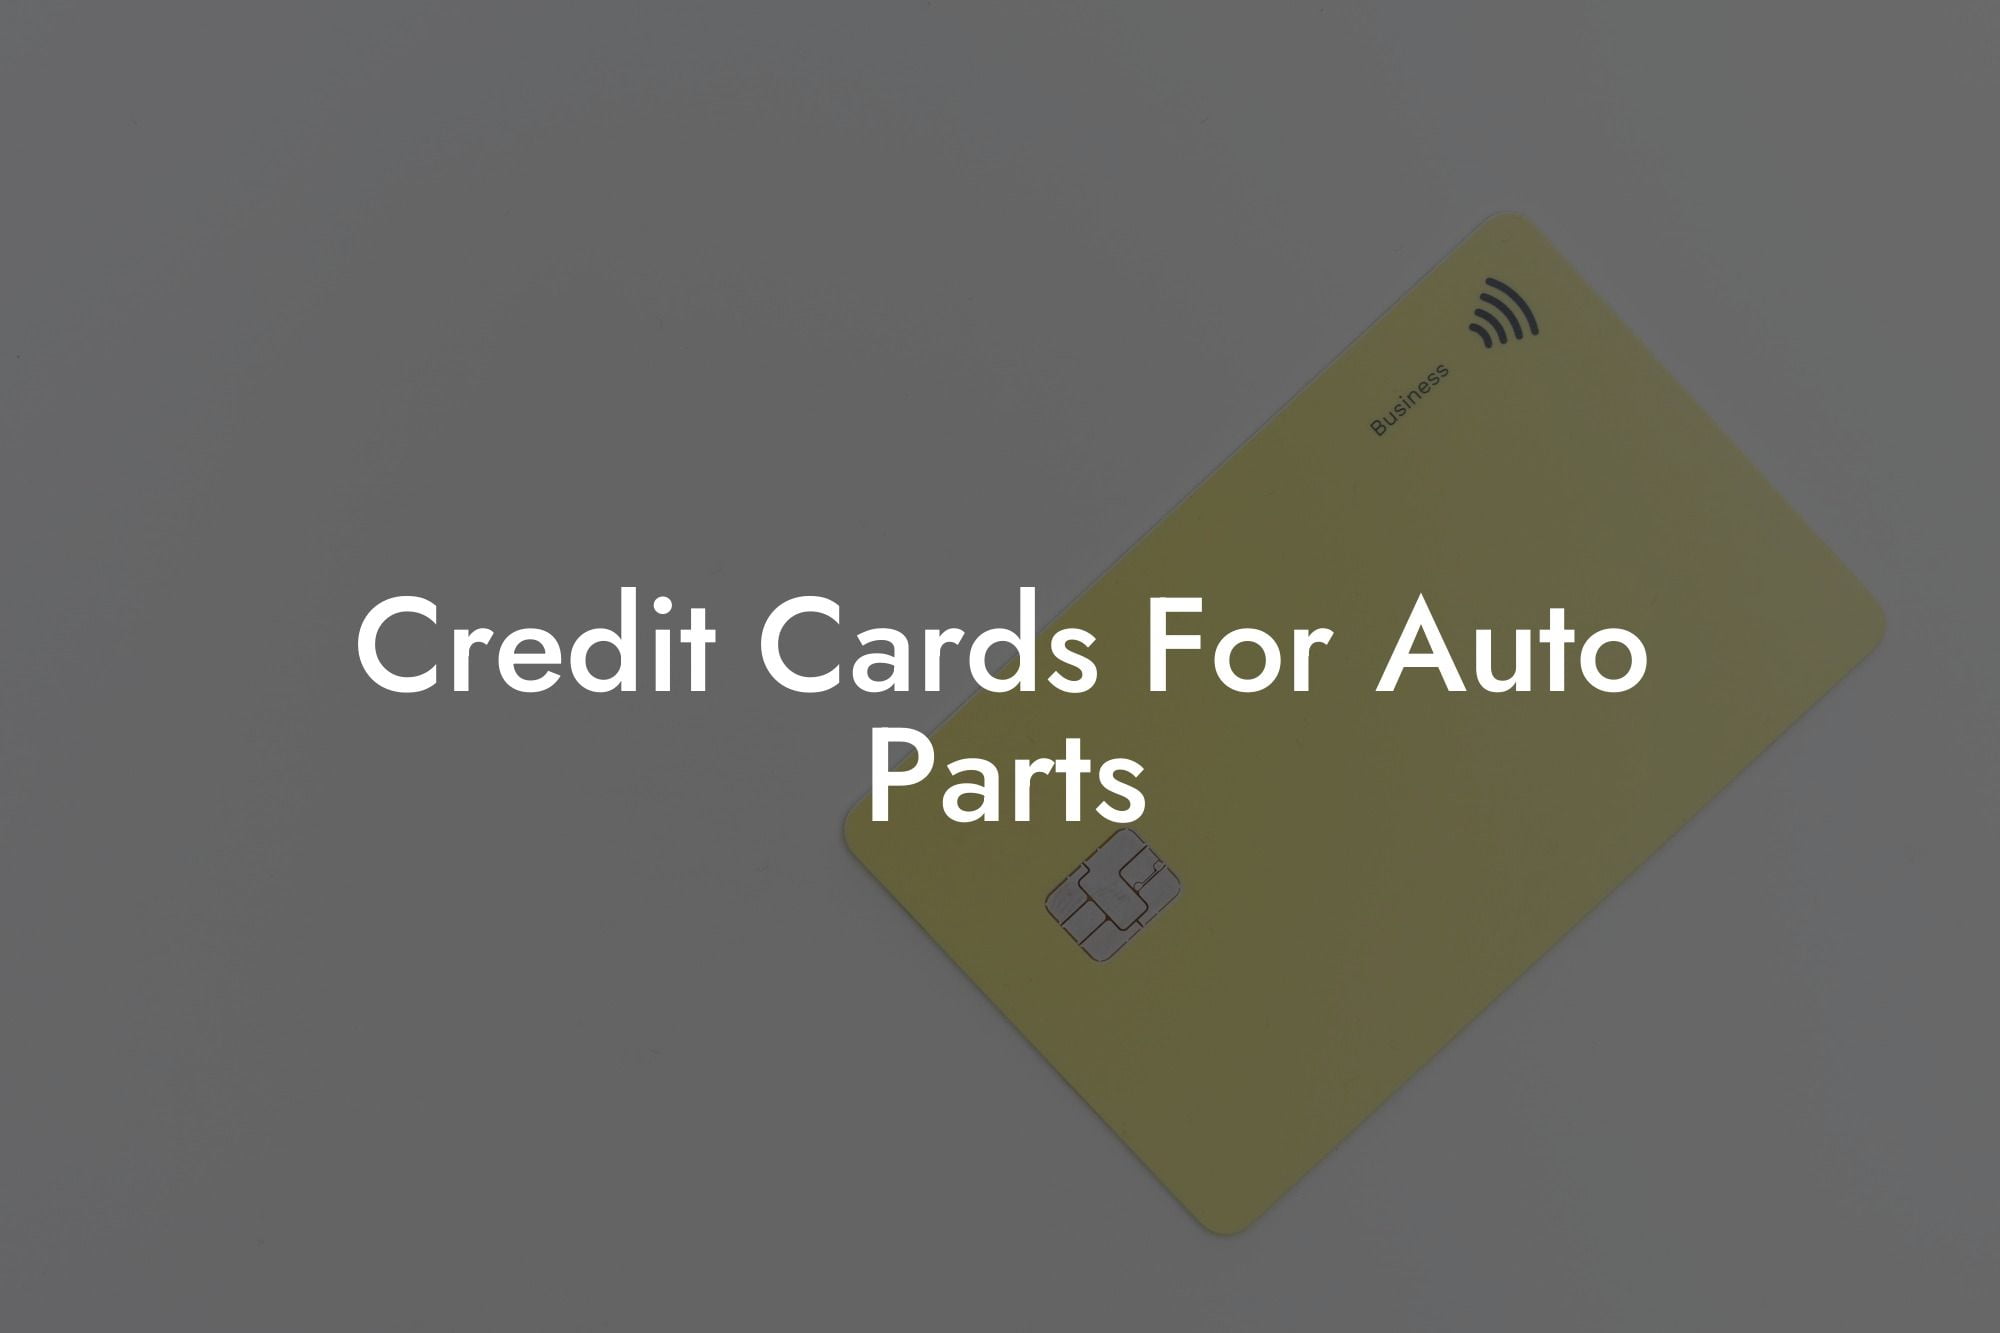 Credit Cards For Auto Parts